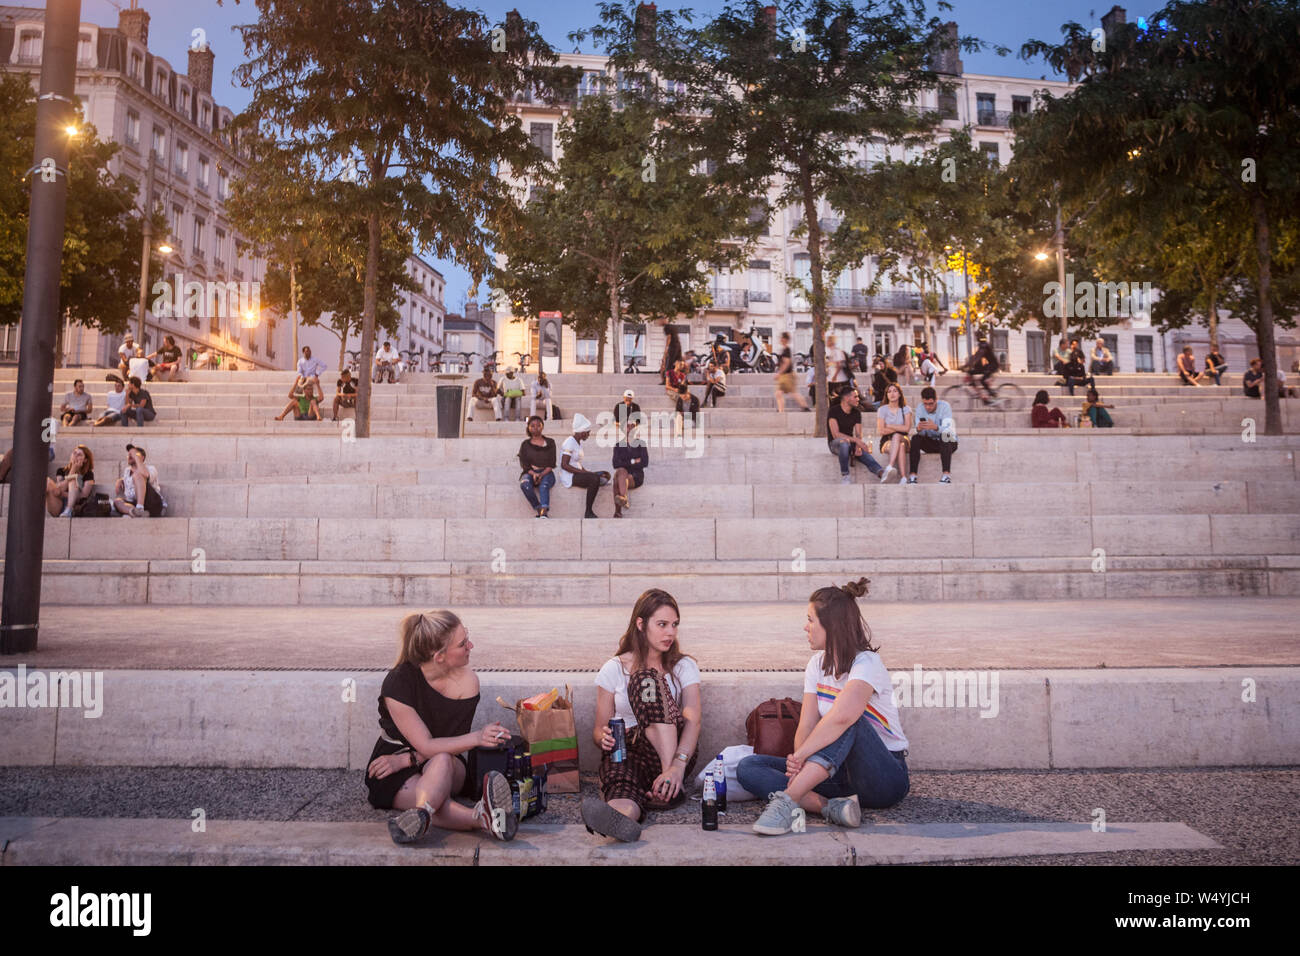 LYON, FRANCE - JULY 18, 2019: French people, mainly women and girls